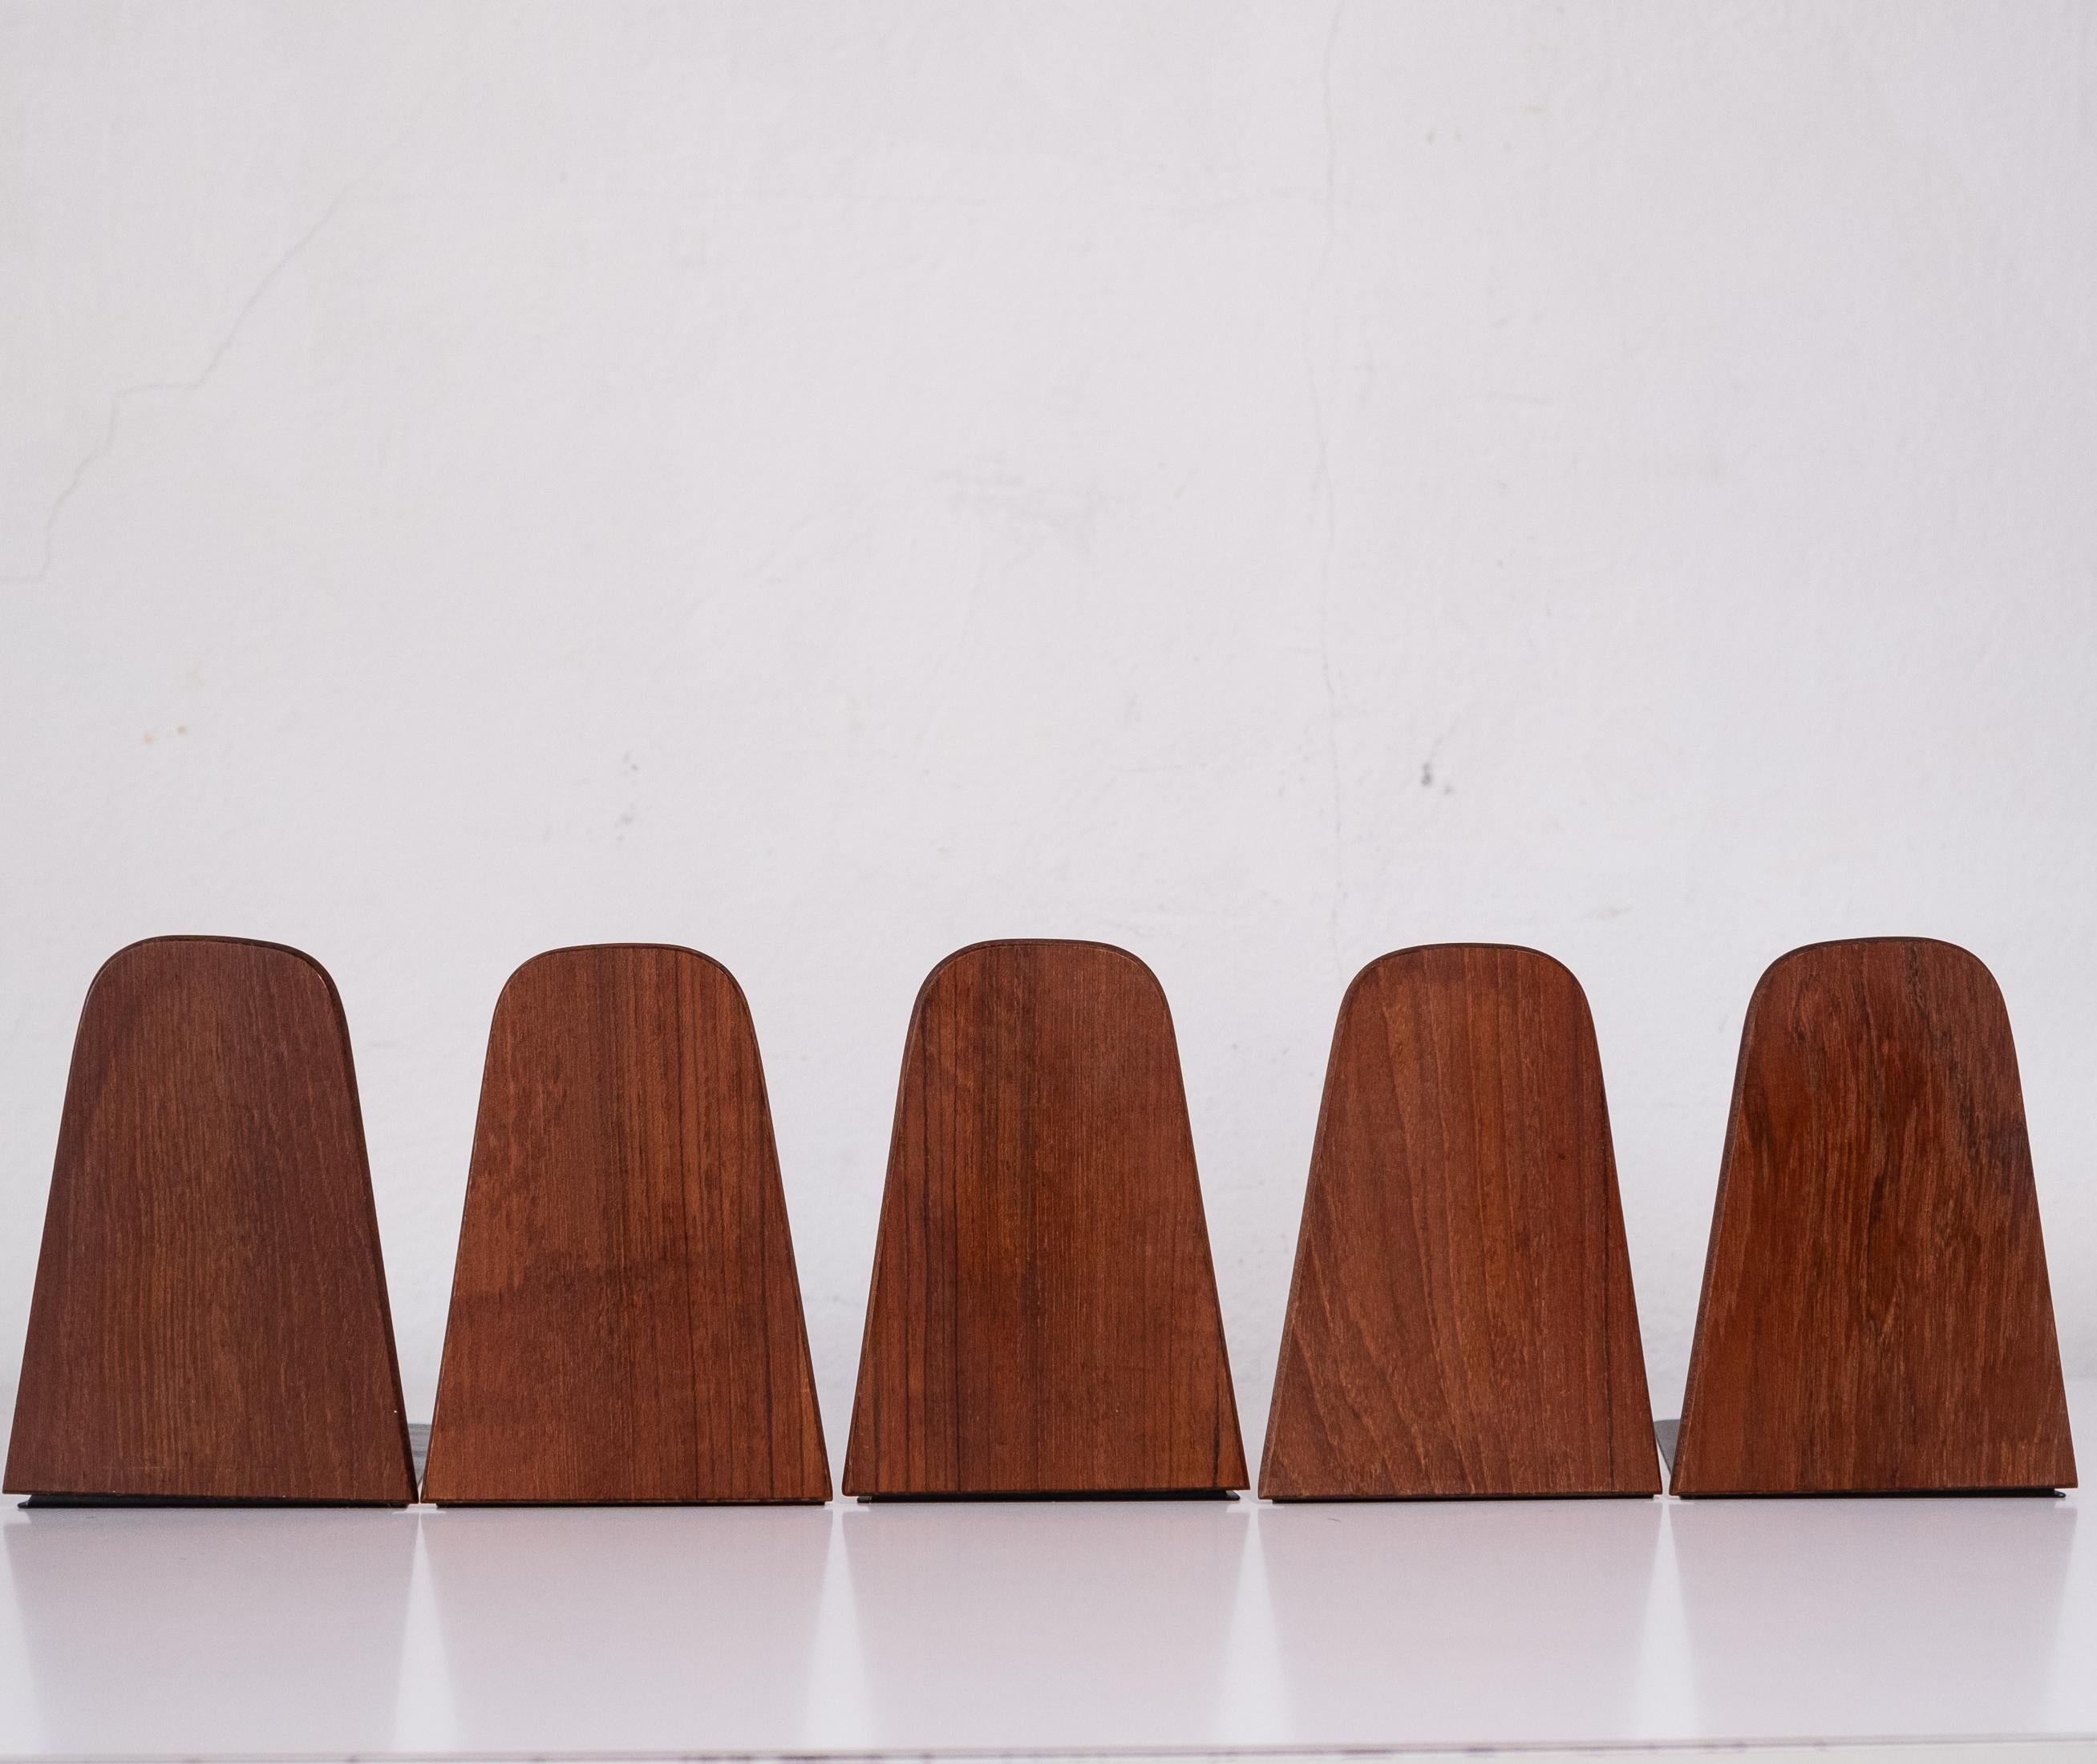 Set of five teak and metal bookends from Denmark. Designed by Kai Kristiansen and manufactured by FM Møbler. 1960s.